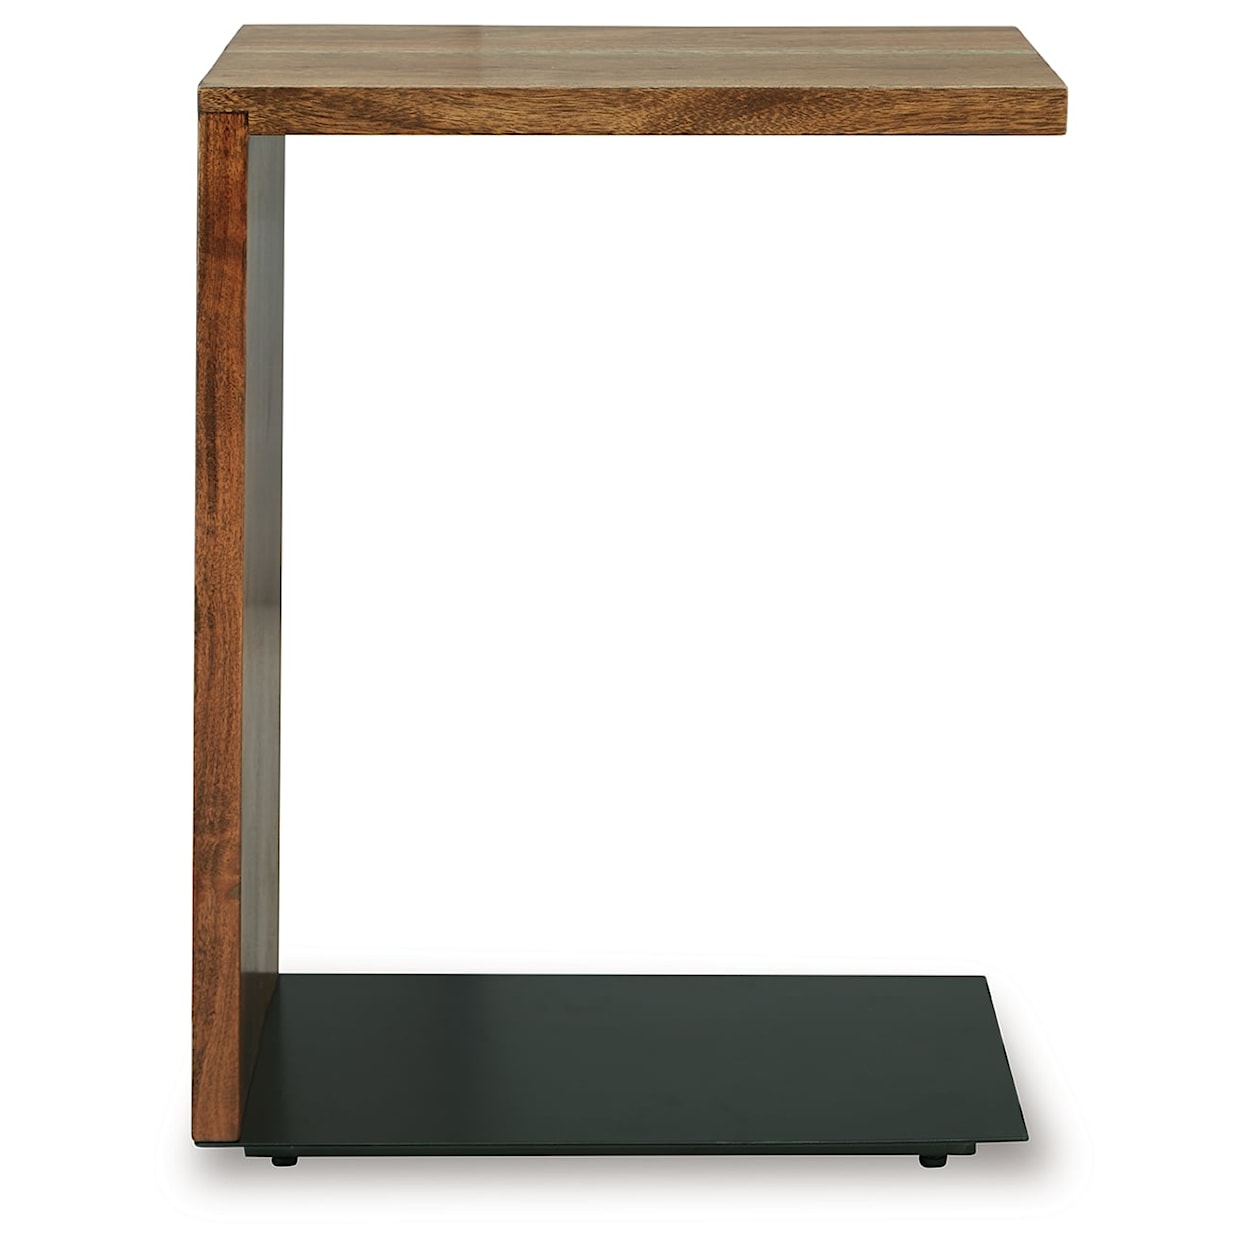 Signature Design by Ashley Wimshaw Accent Table